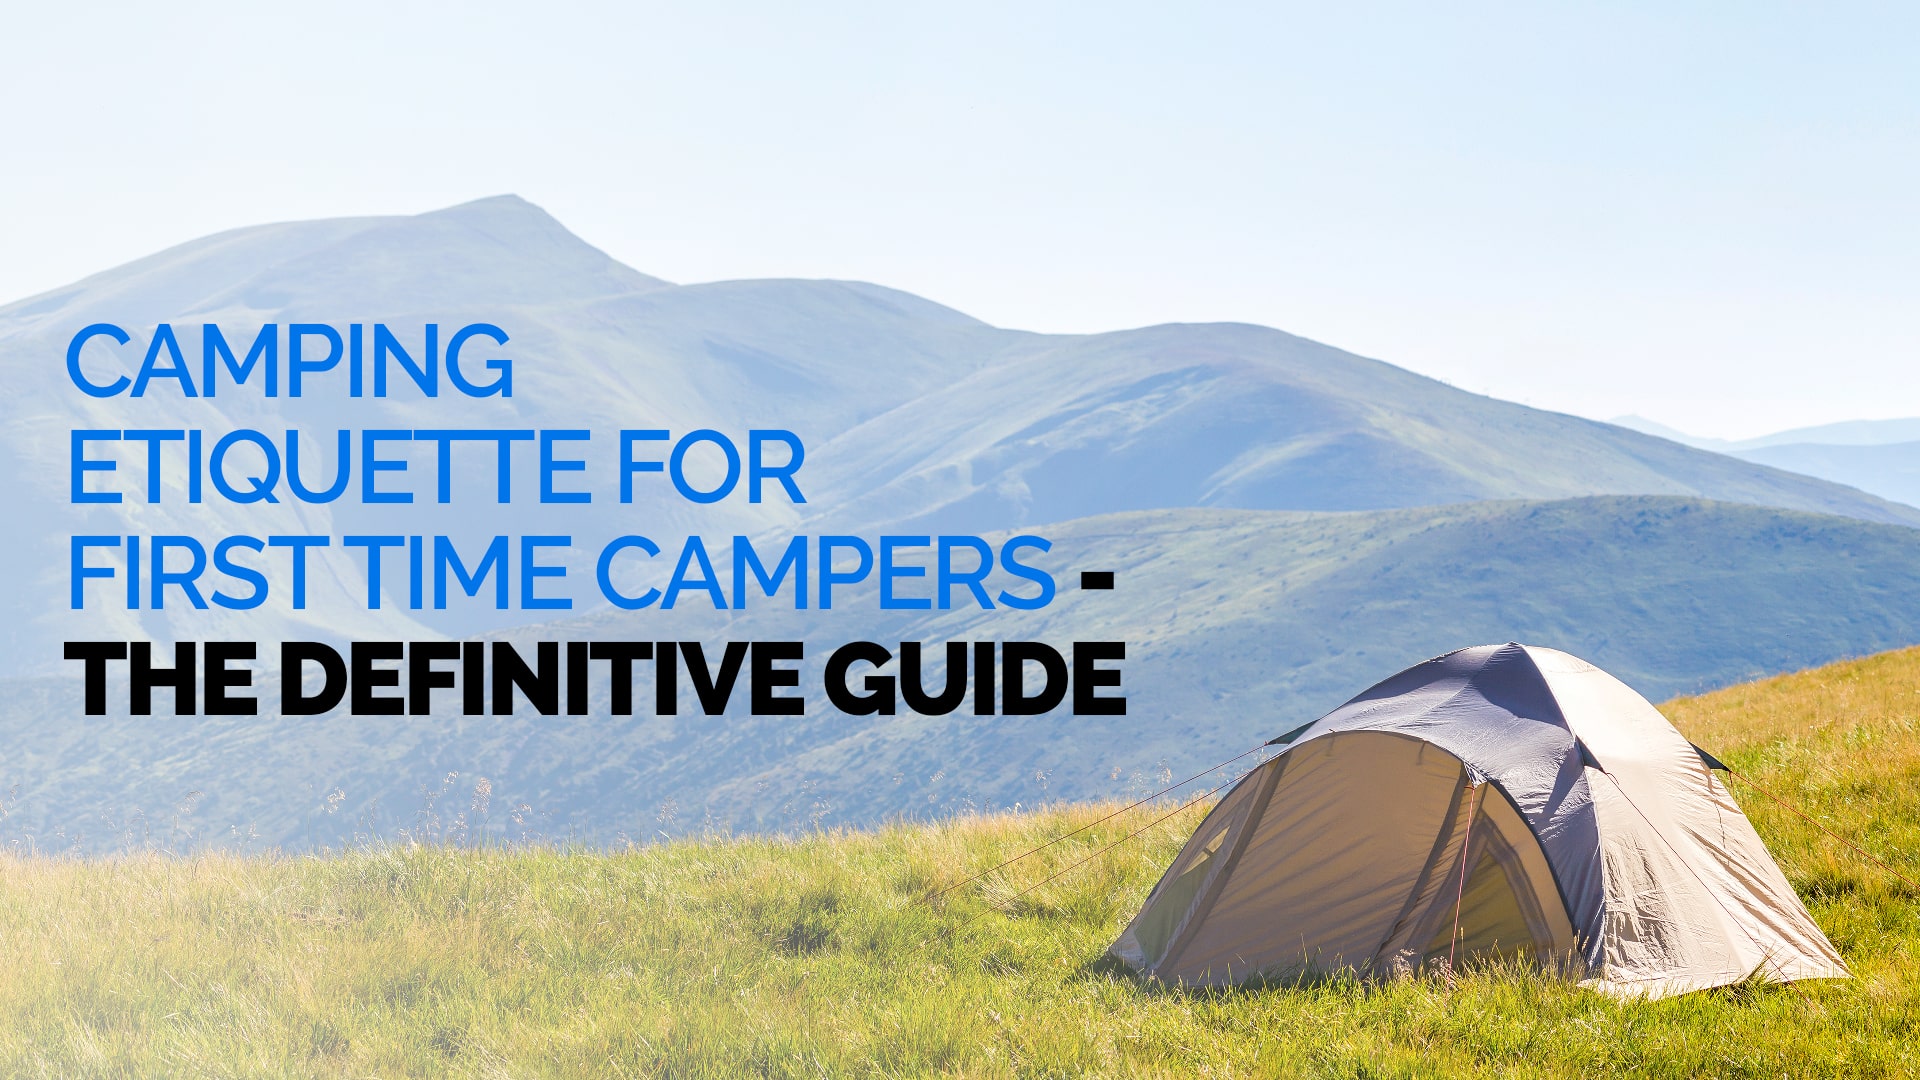 Camping Etiquette for First Time Campers - The Definitive Guide